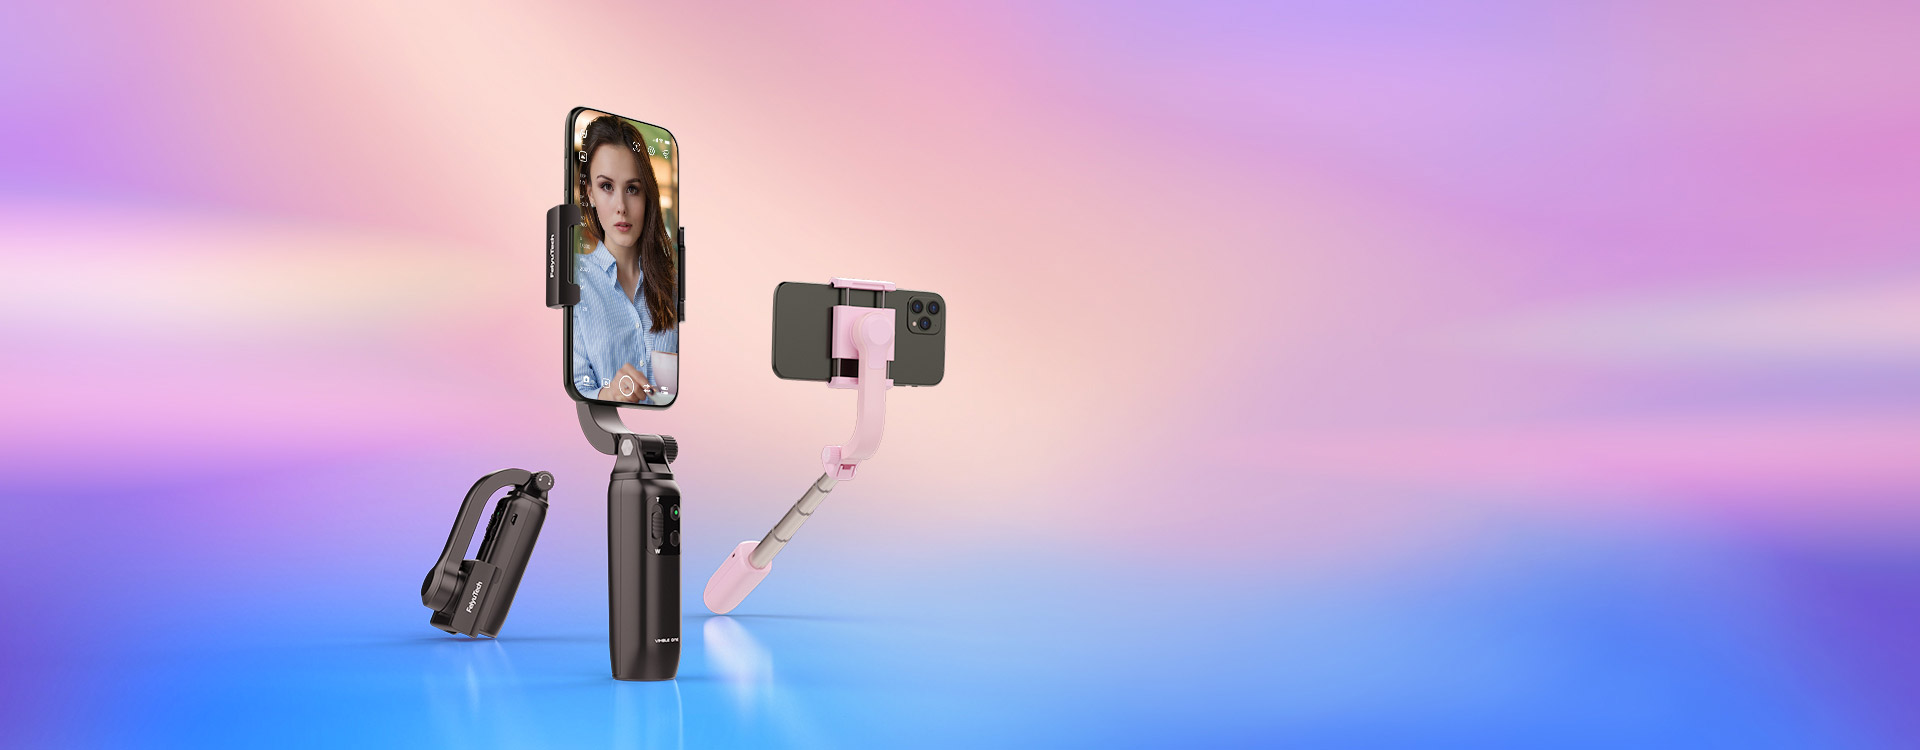 Stretchable Handheld Smartphone Gimbal for Live Streaming and Anti Shaking